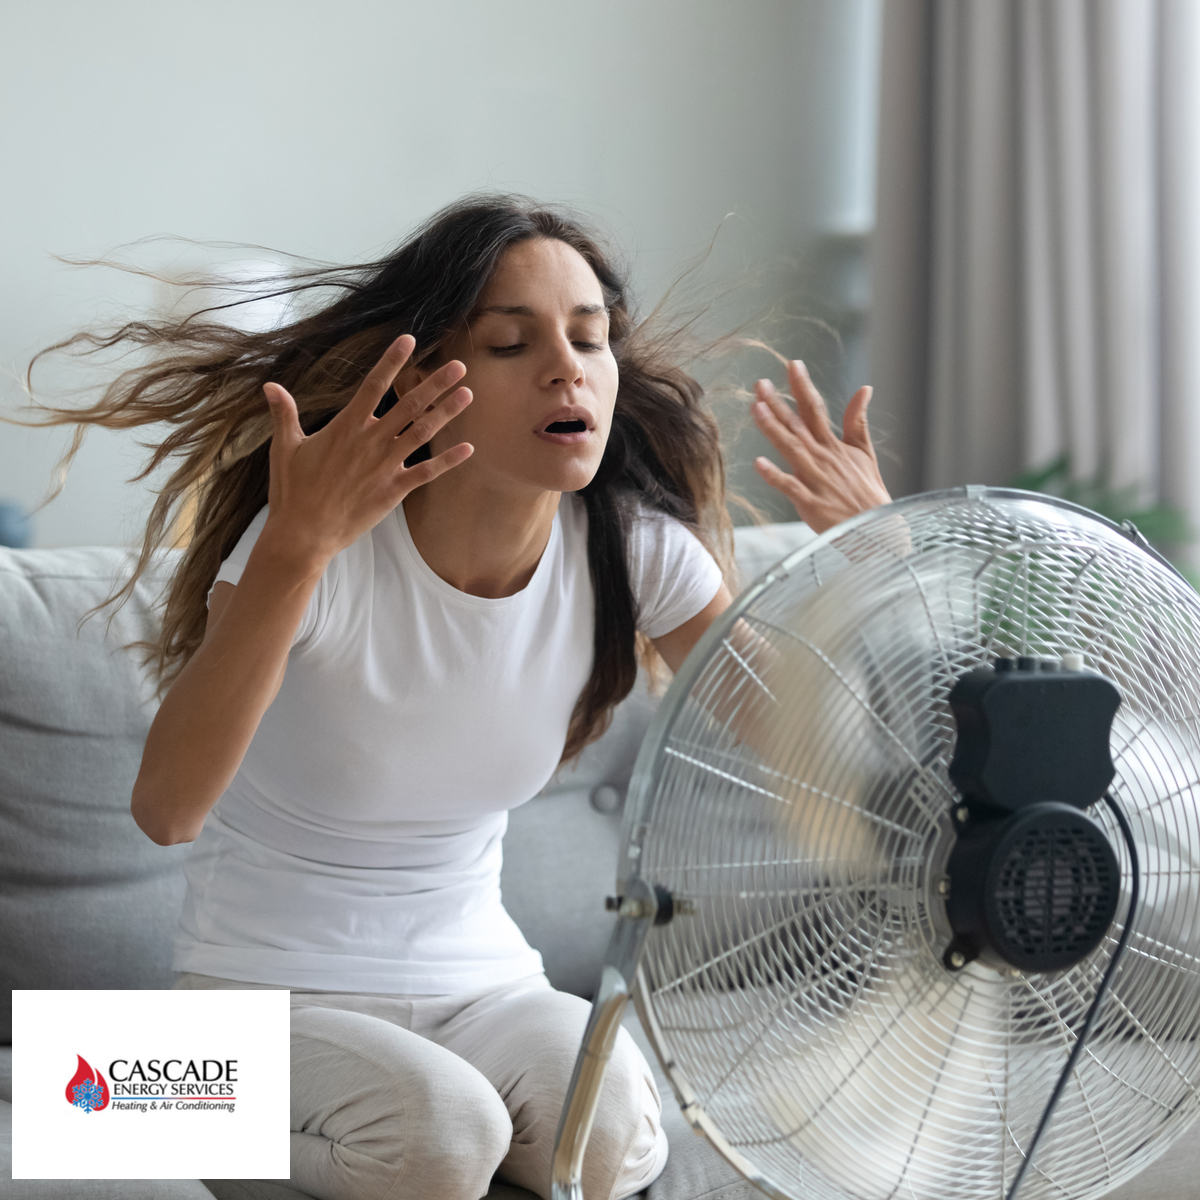 Don't Let a Broken AC Ruin Your Summer: Get Air Conditioning Maintenance Now